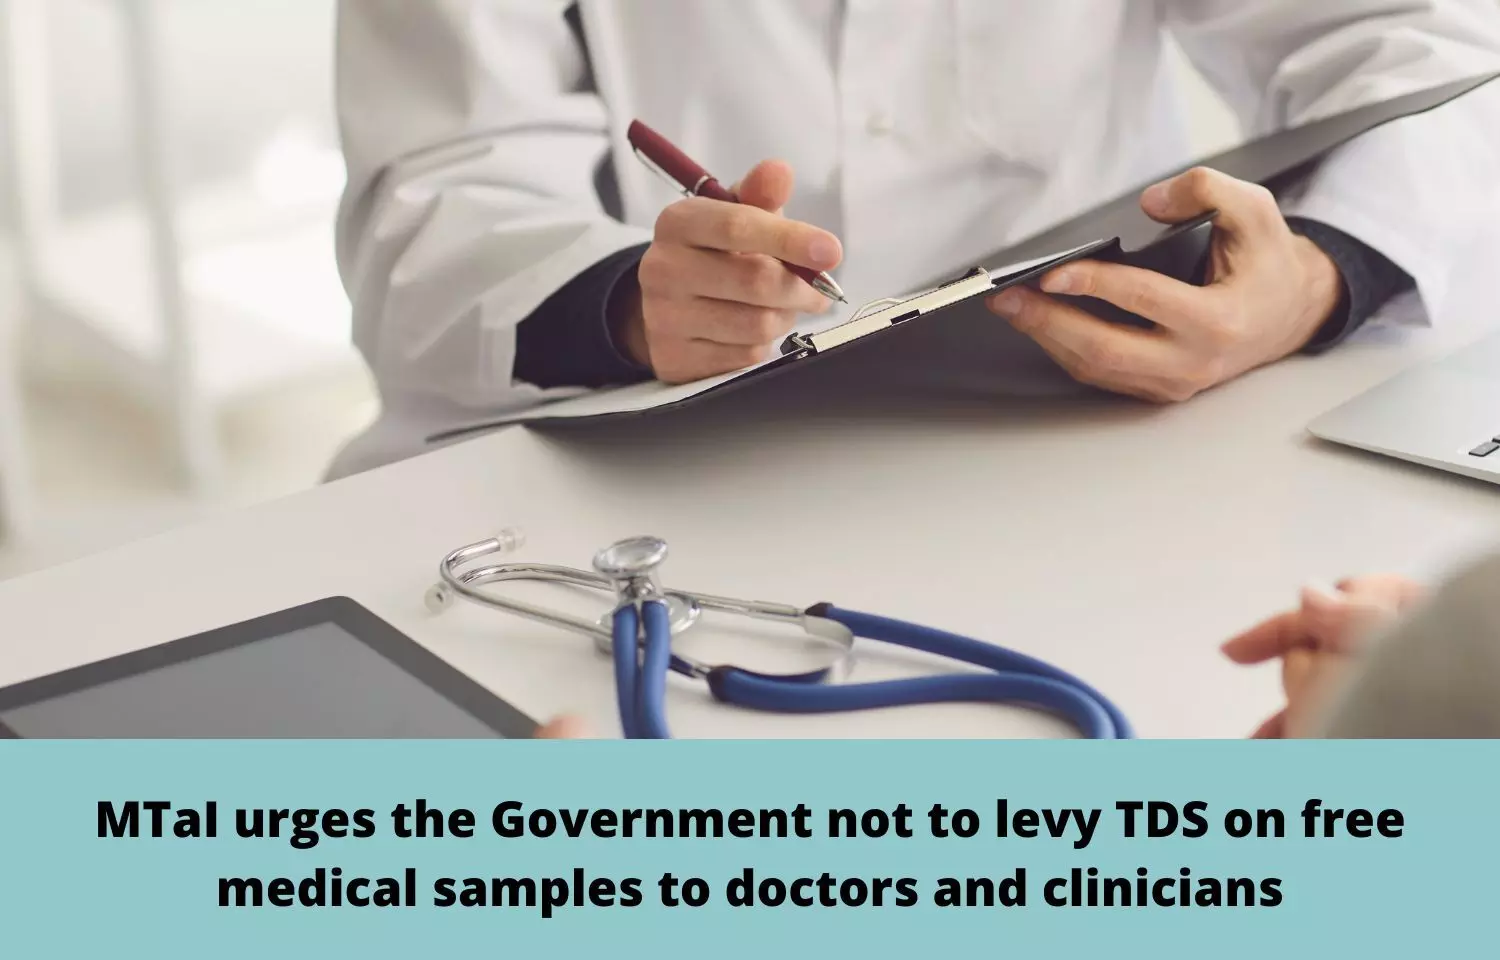 MTaI urges the Government not to levy TDS on free medical samples to doctors, clinicians